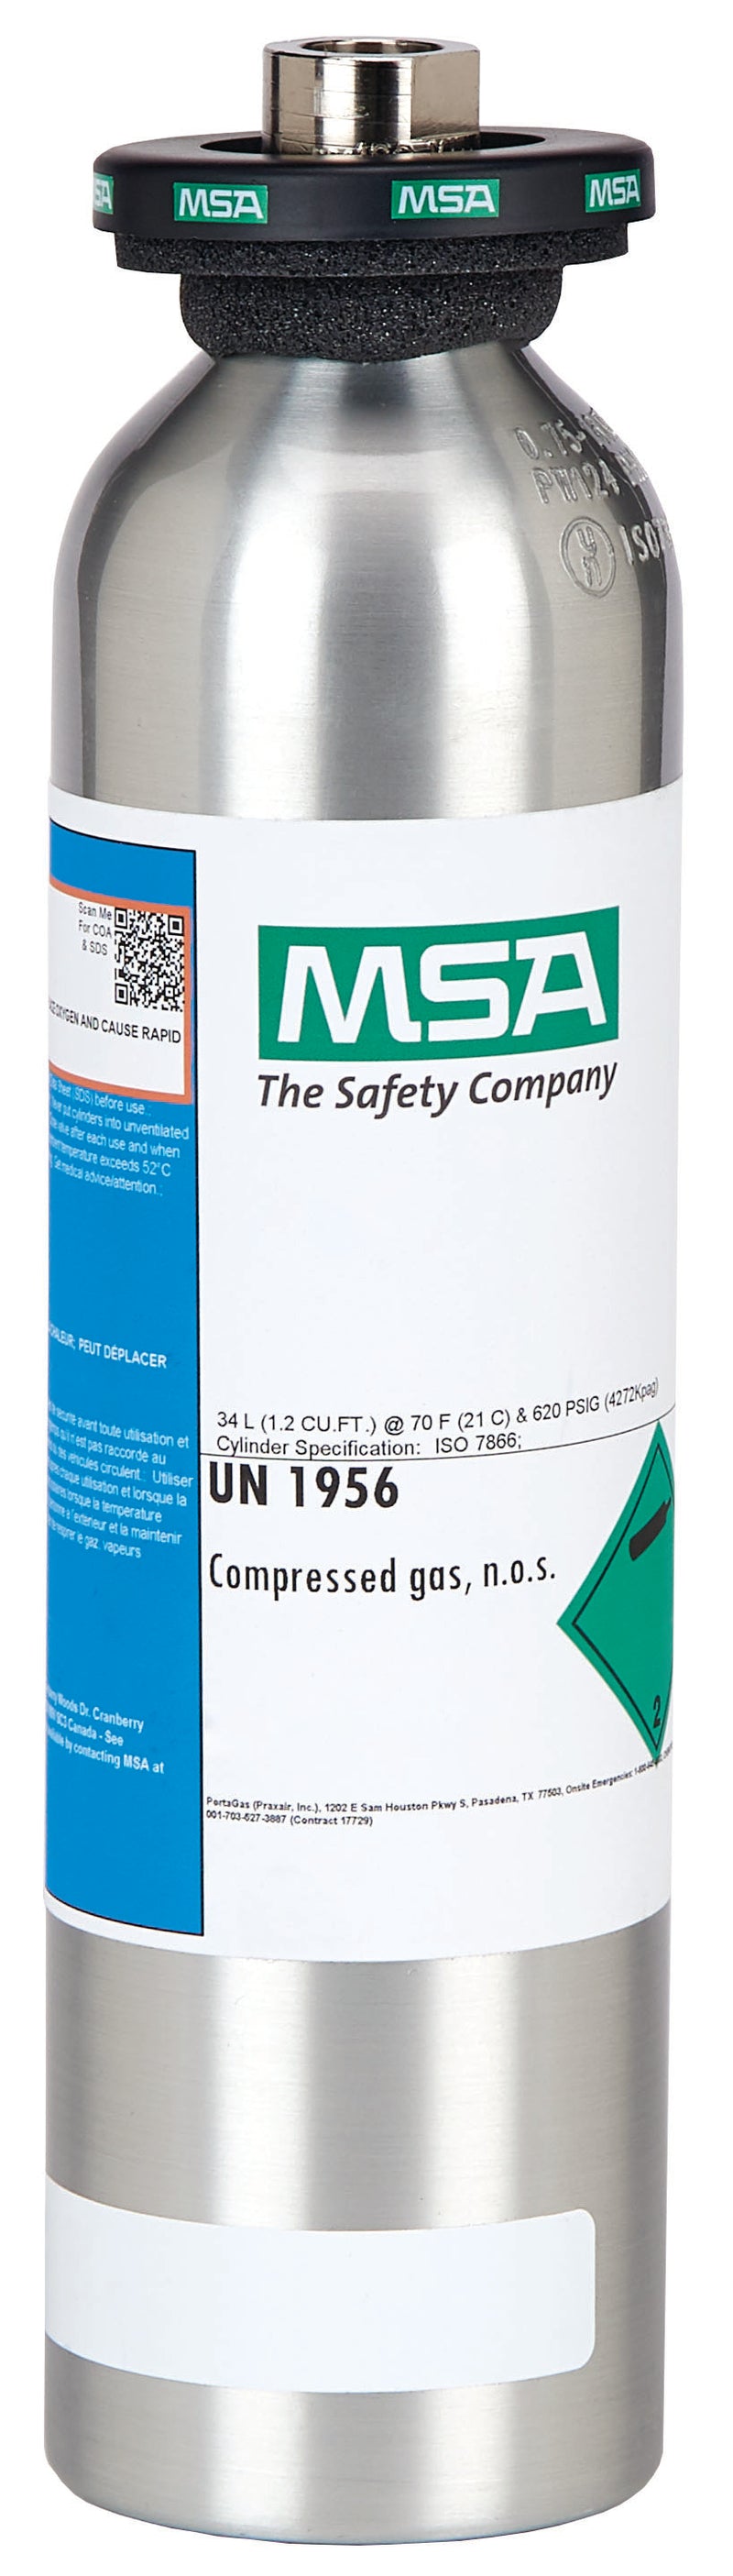 Macurco R-404A Gas 5000PPM Refrigerant Cal Gas Cylinder 34L 5000 ppm